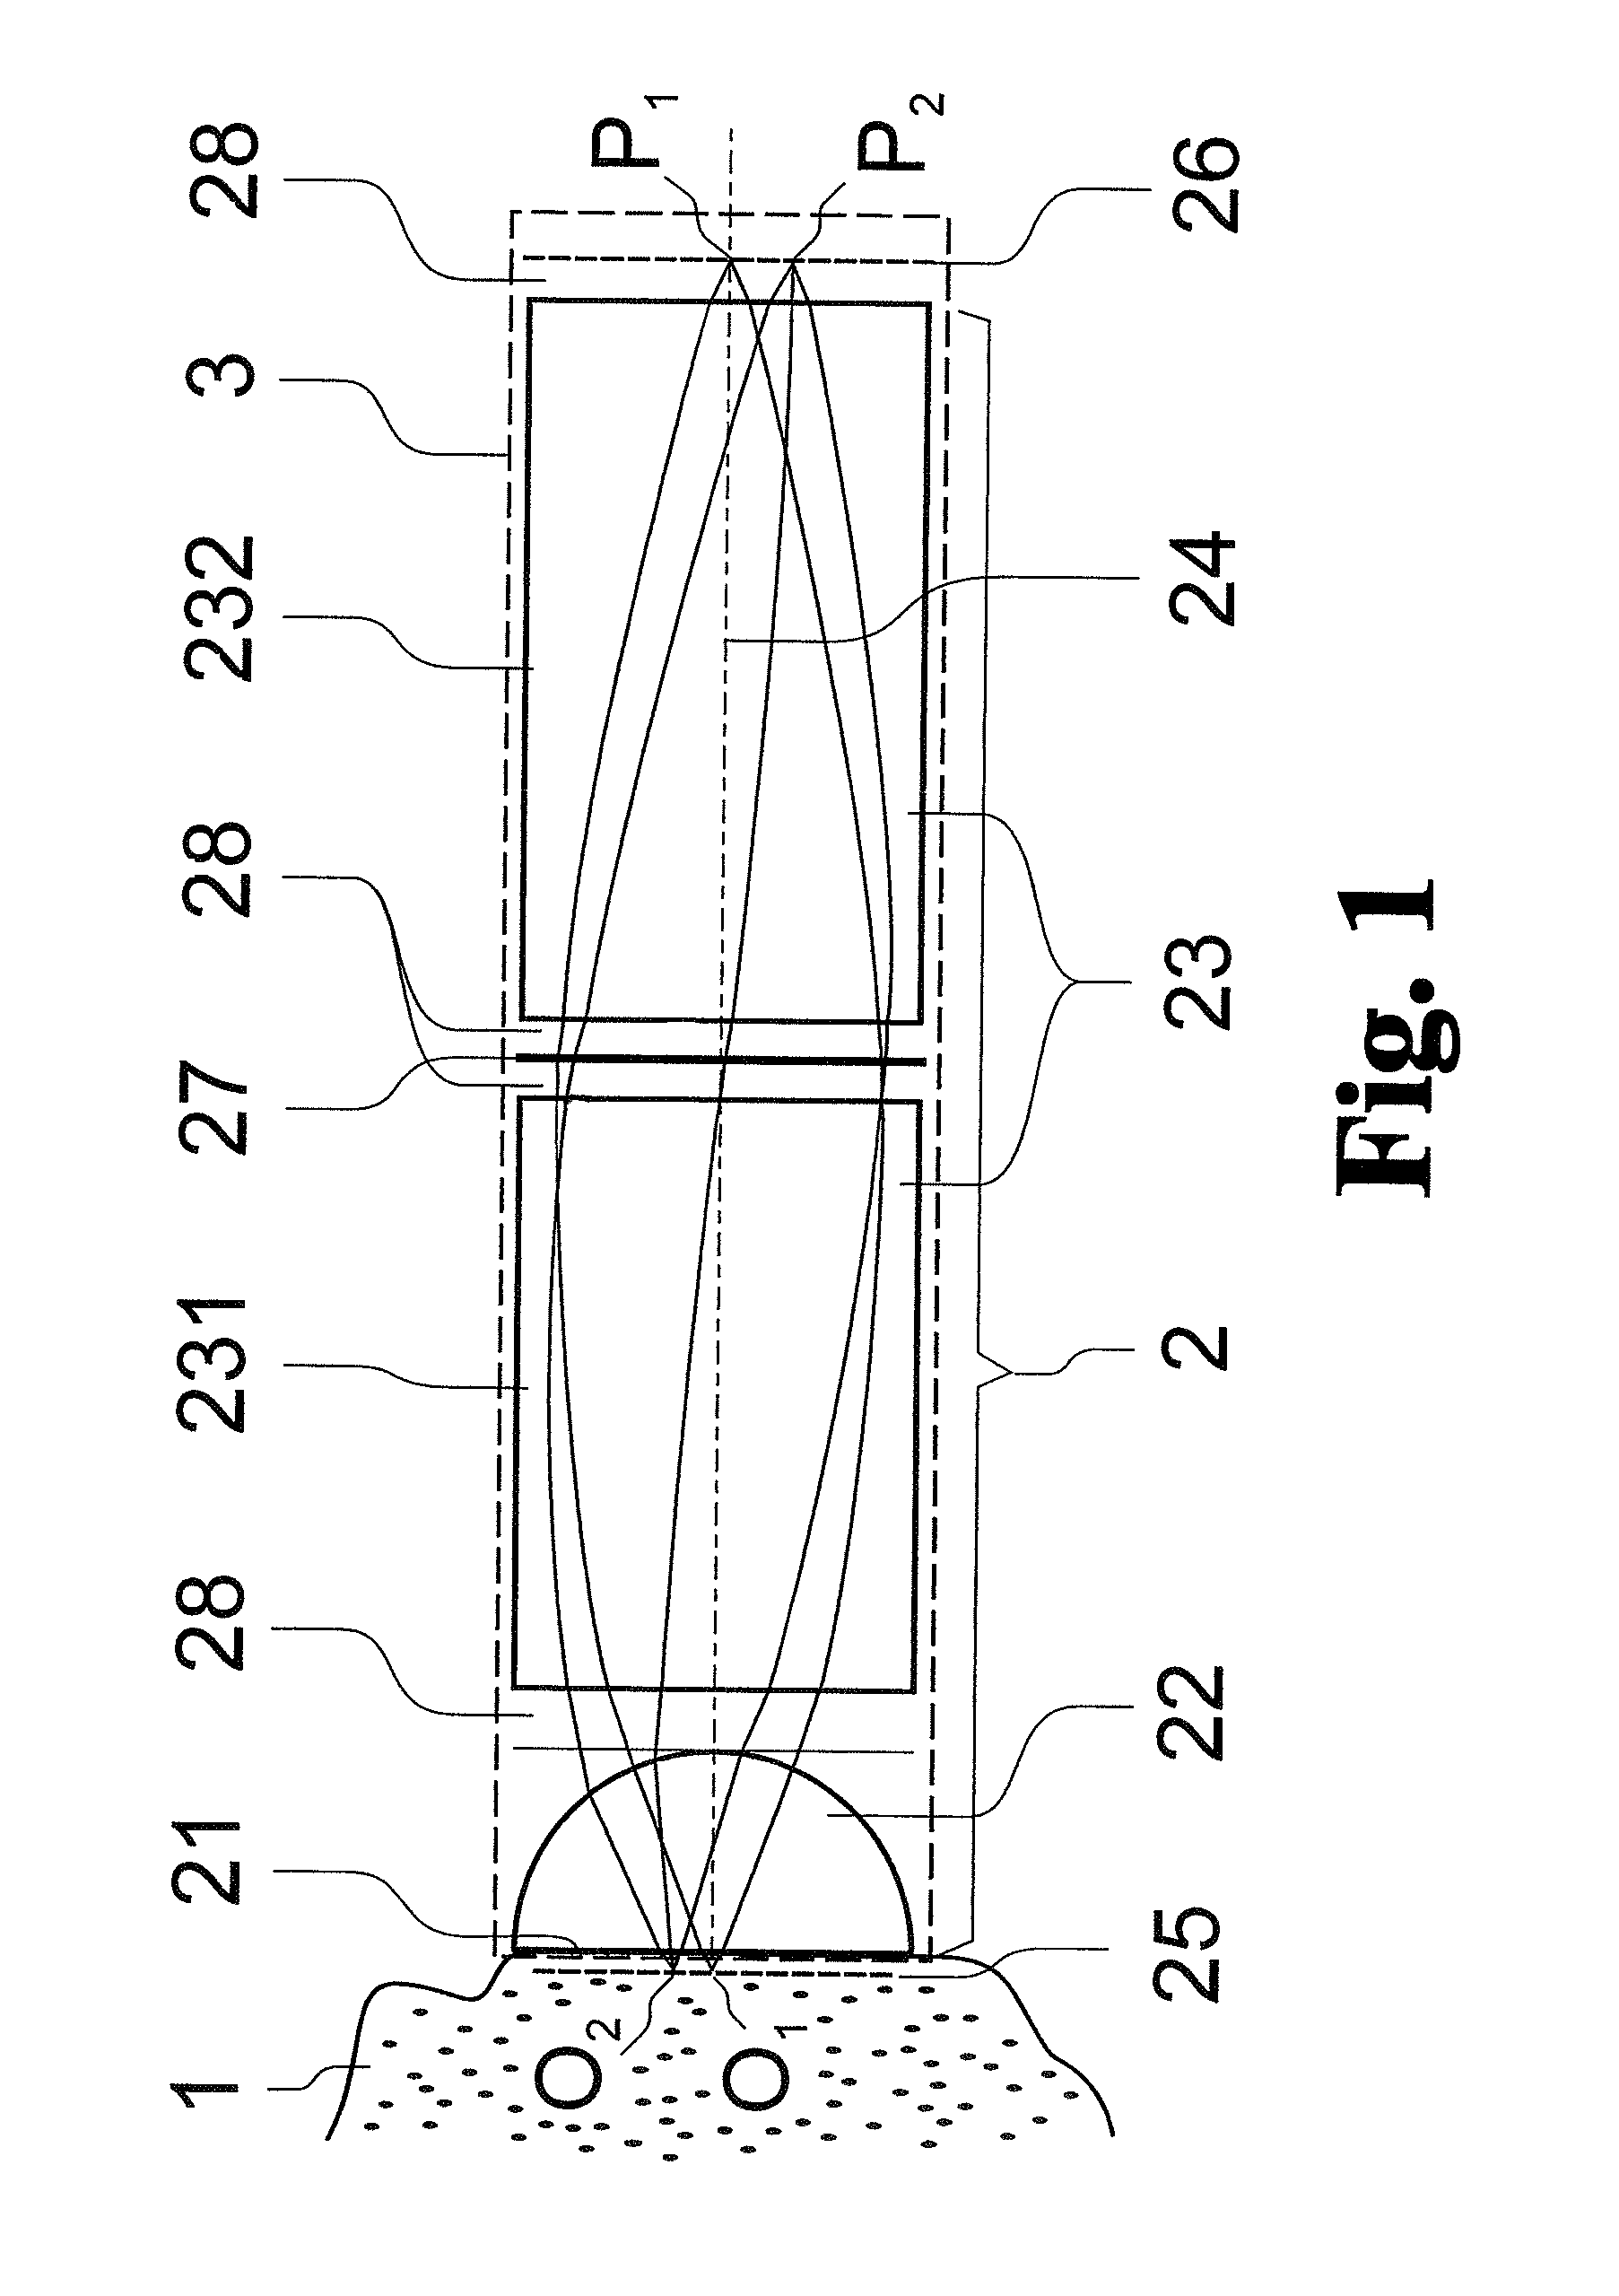 Miniaturized optically imaging system with high lateral and axial resolution